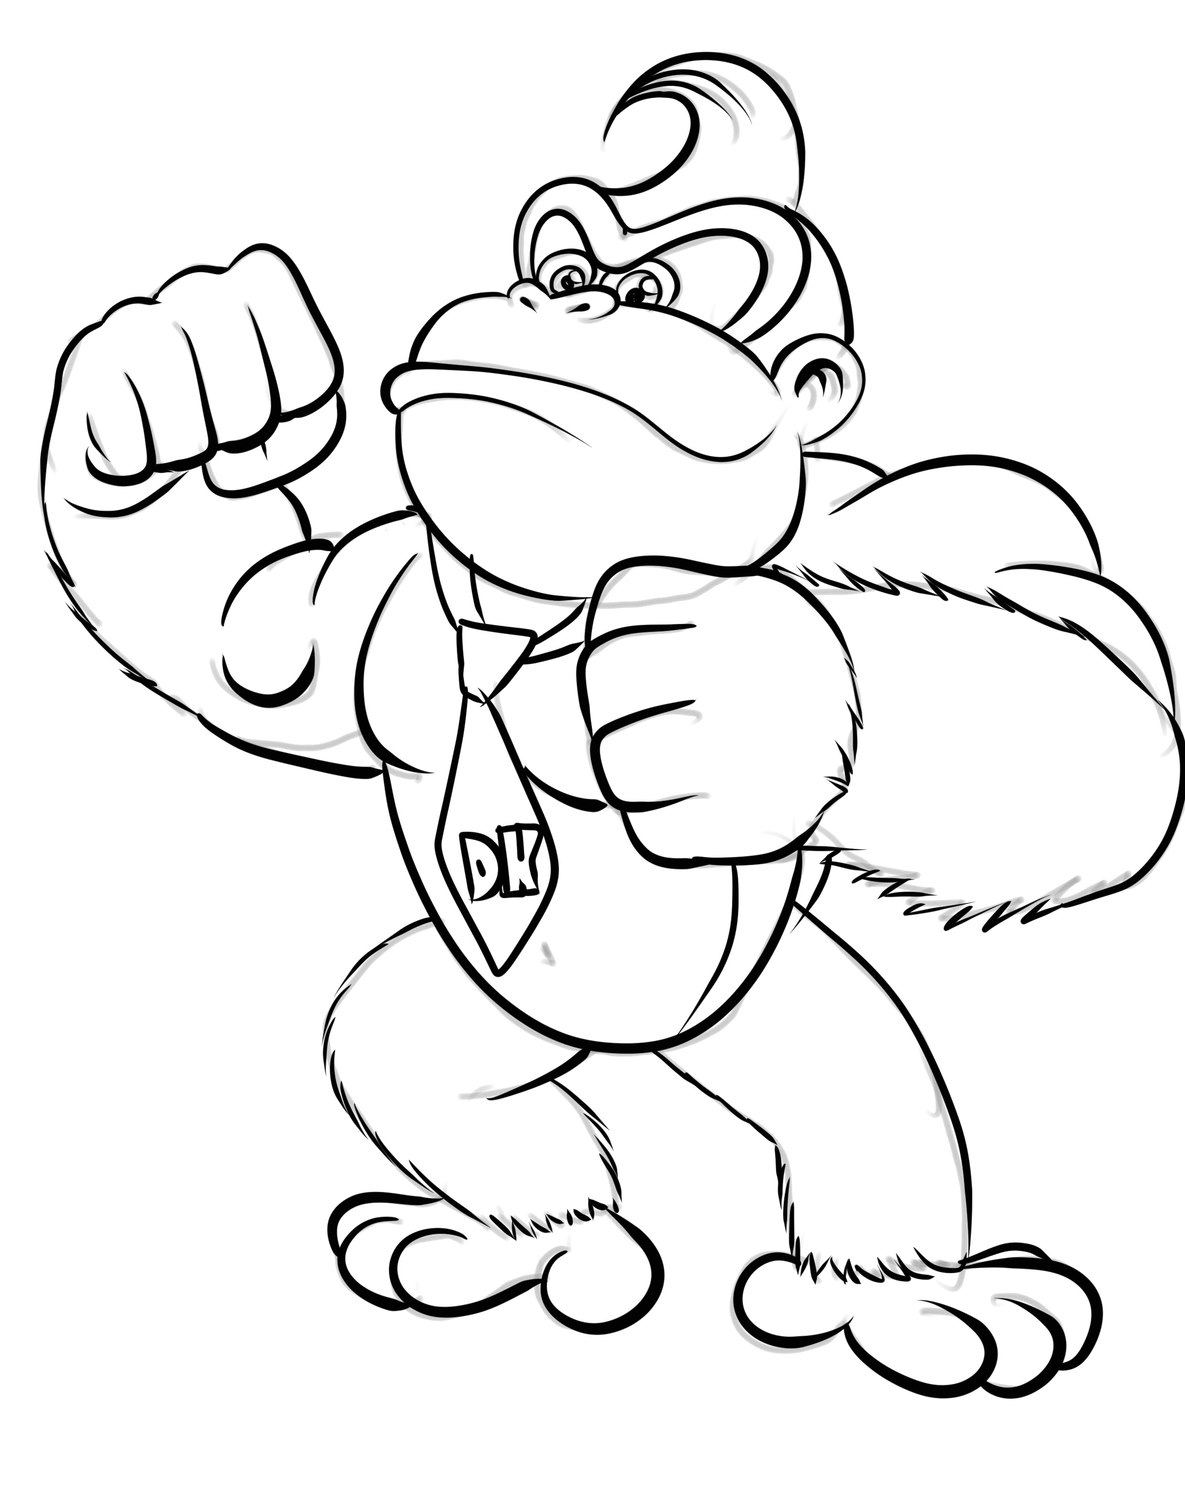 Donkey Kong 05  coloring page to print and coloring